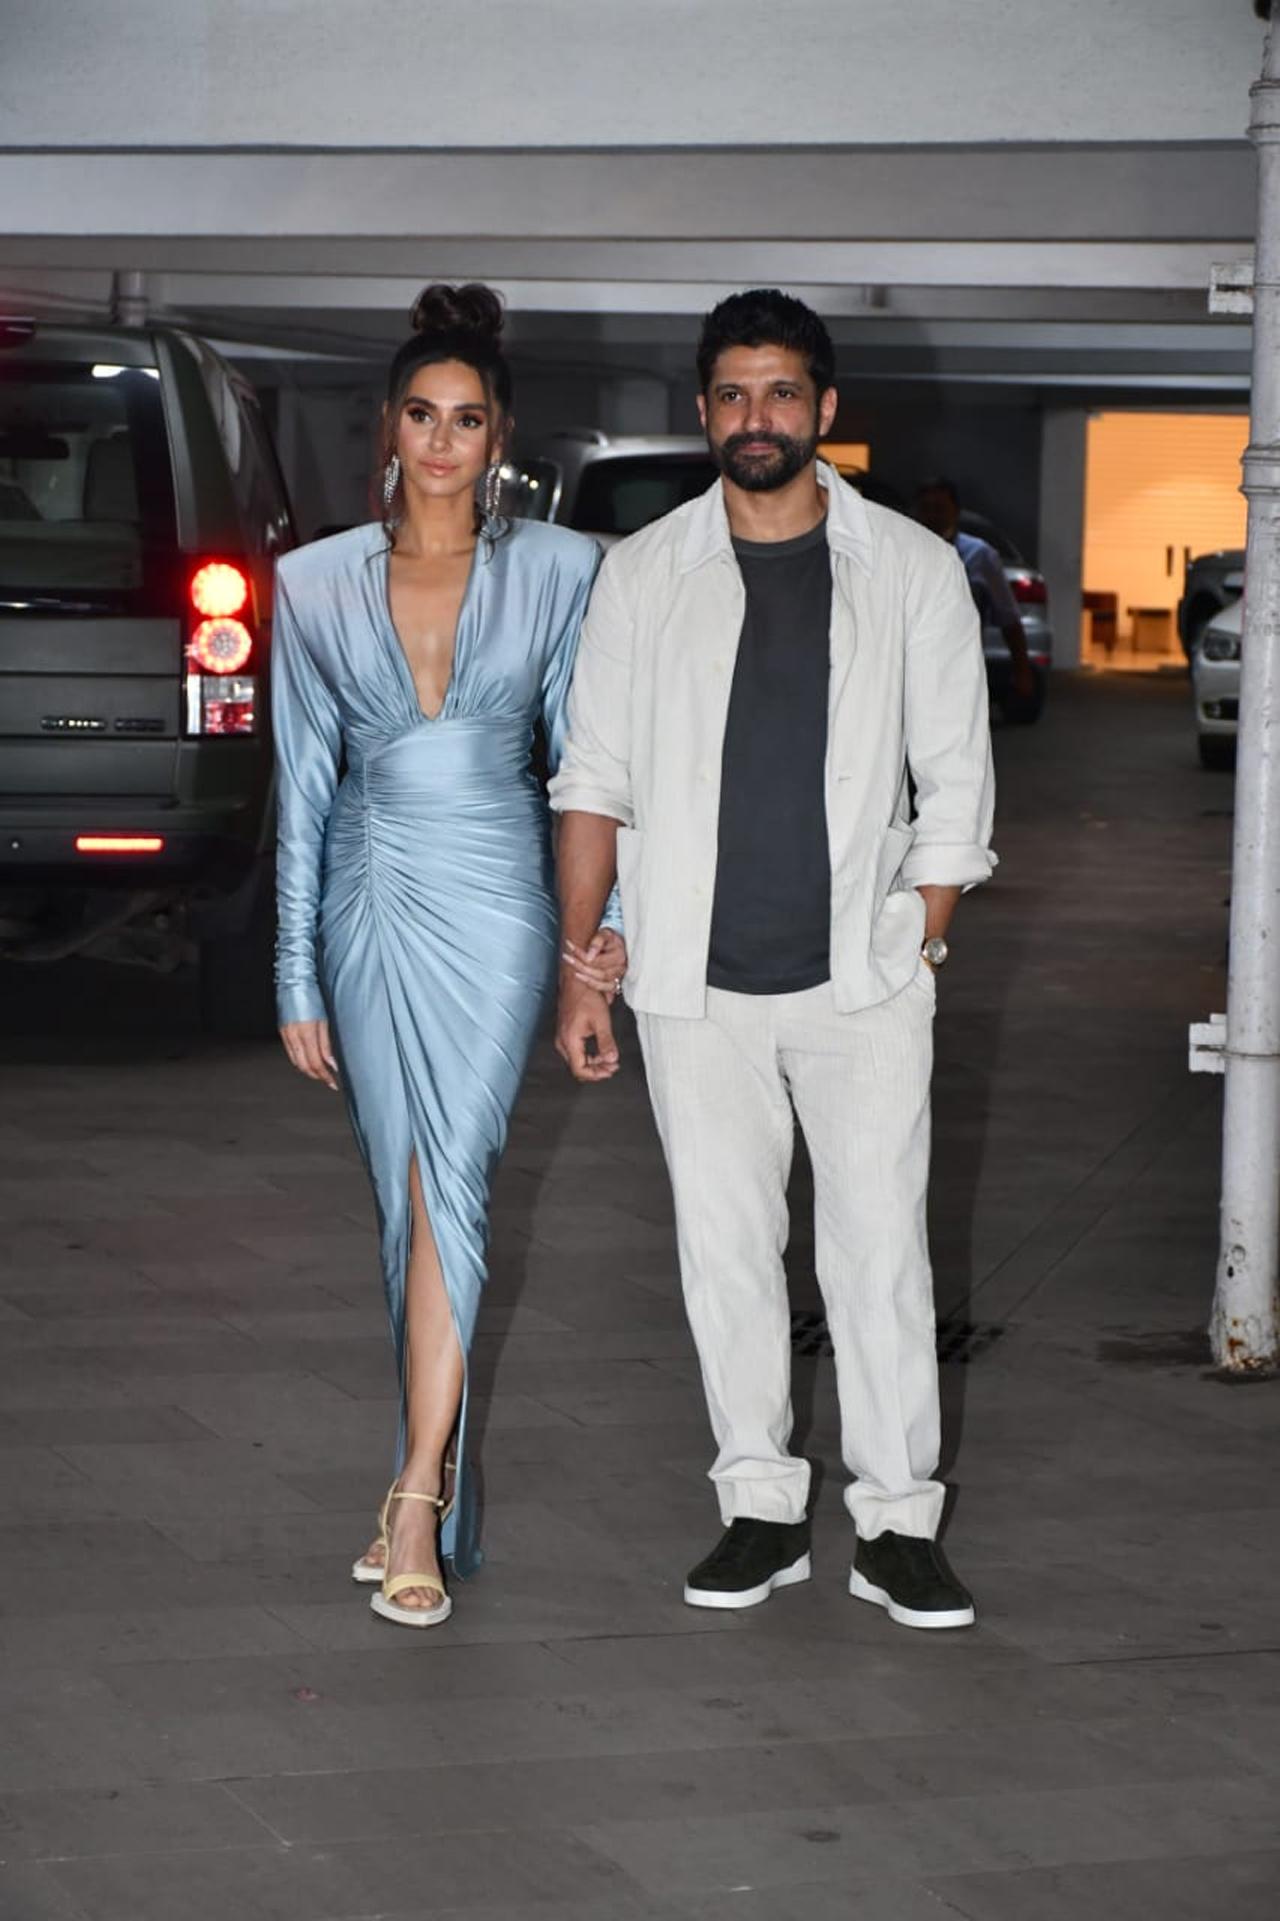 The FIFA World Cup saw everyone from Shanaya Kapoor to Deepika Padukone  dressed in their match-day best